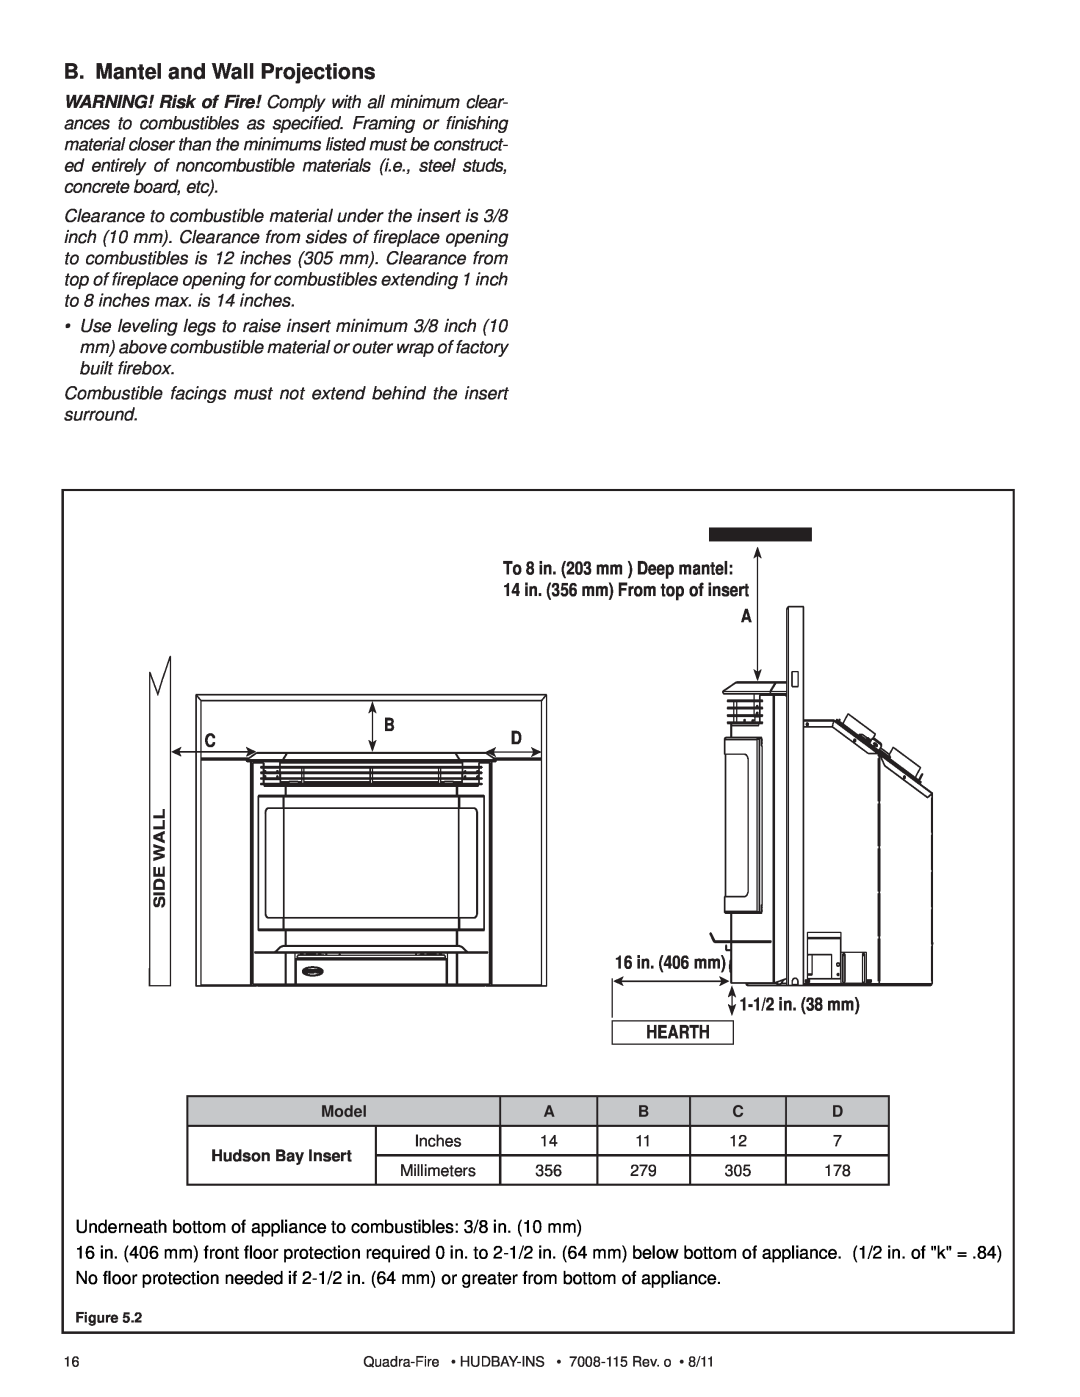 Quadra-Fire 7008-115 owner manual B. Mantel and Wall Projections, Side Wall, 16 in. 406 mm, 1-1/2in. 38 mm, Hearth 